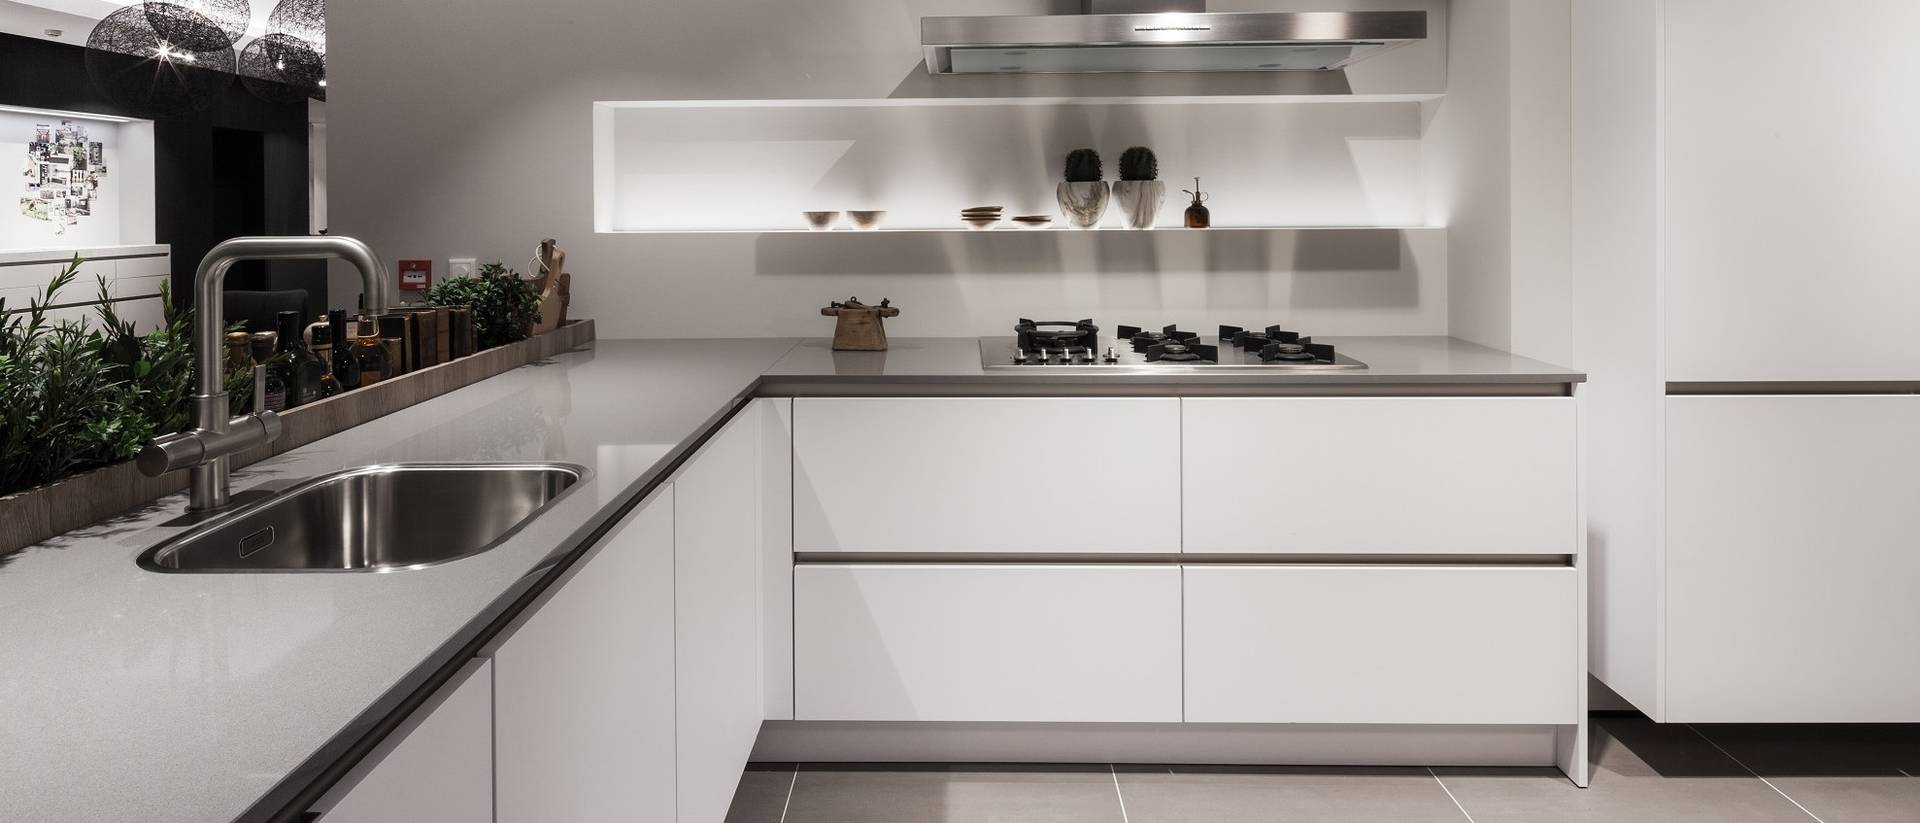 SieMatic kitchen showrooms: Take a look at timelessly elegant design for the kitchen